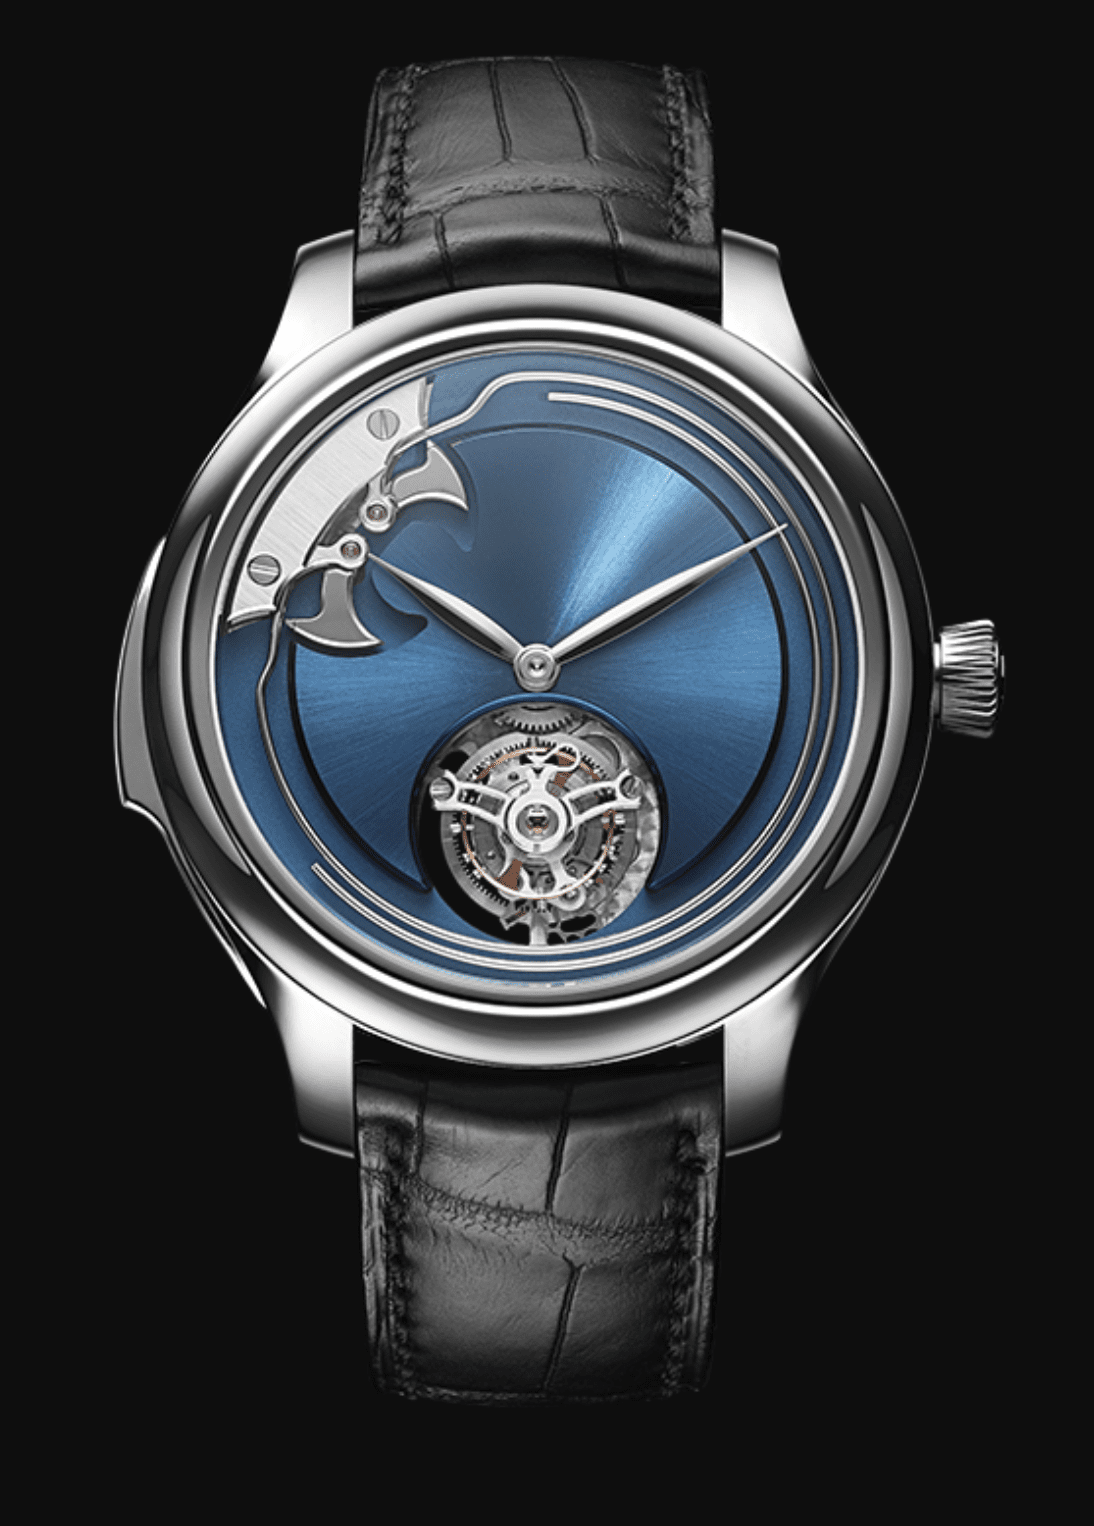 H Moser Endeavor Minute Repeater